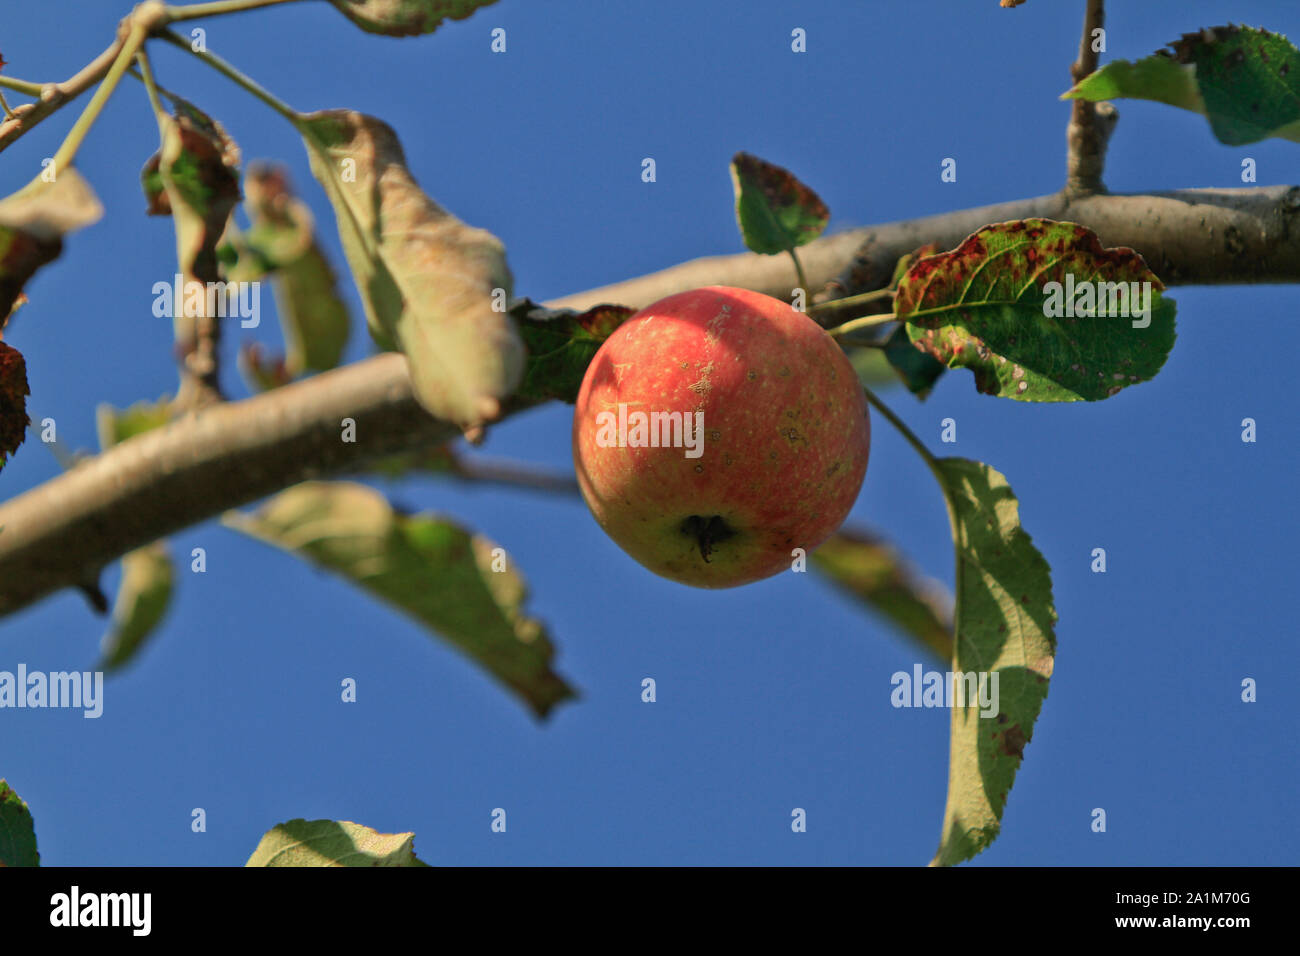 ripe red apple on a branch Stock Photo